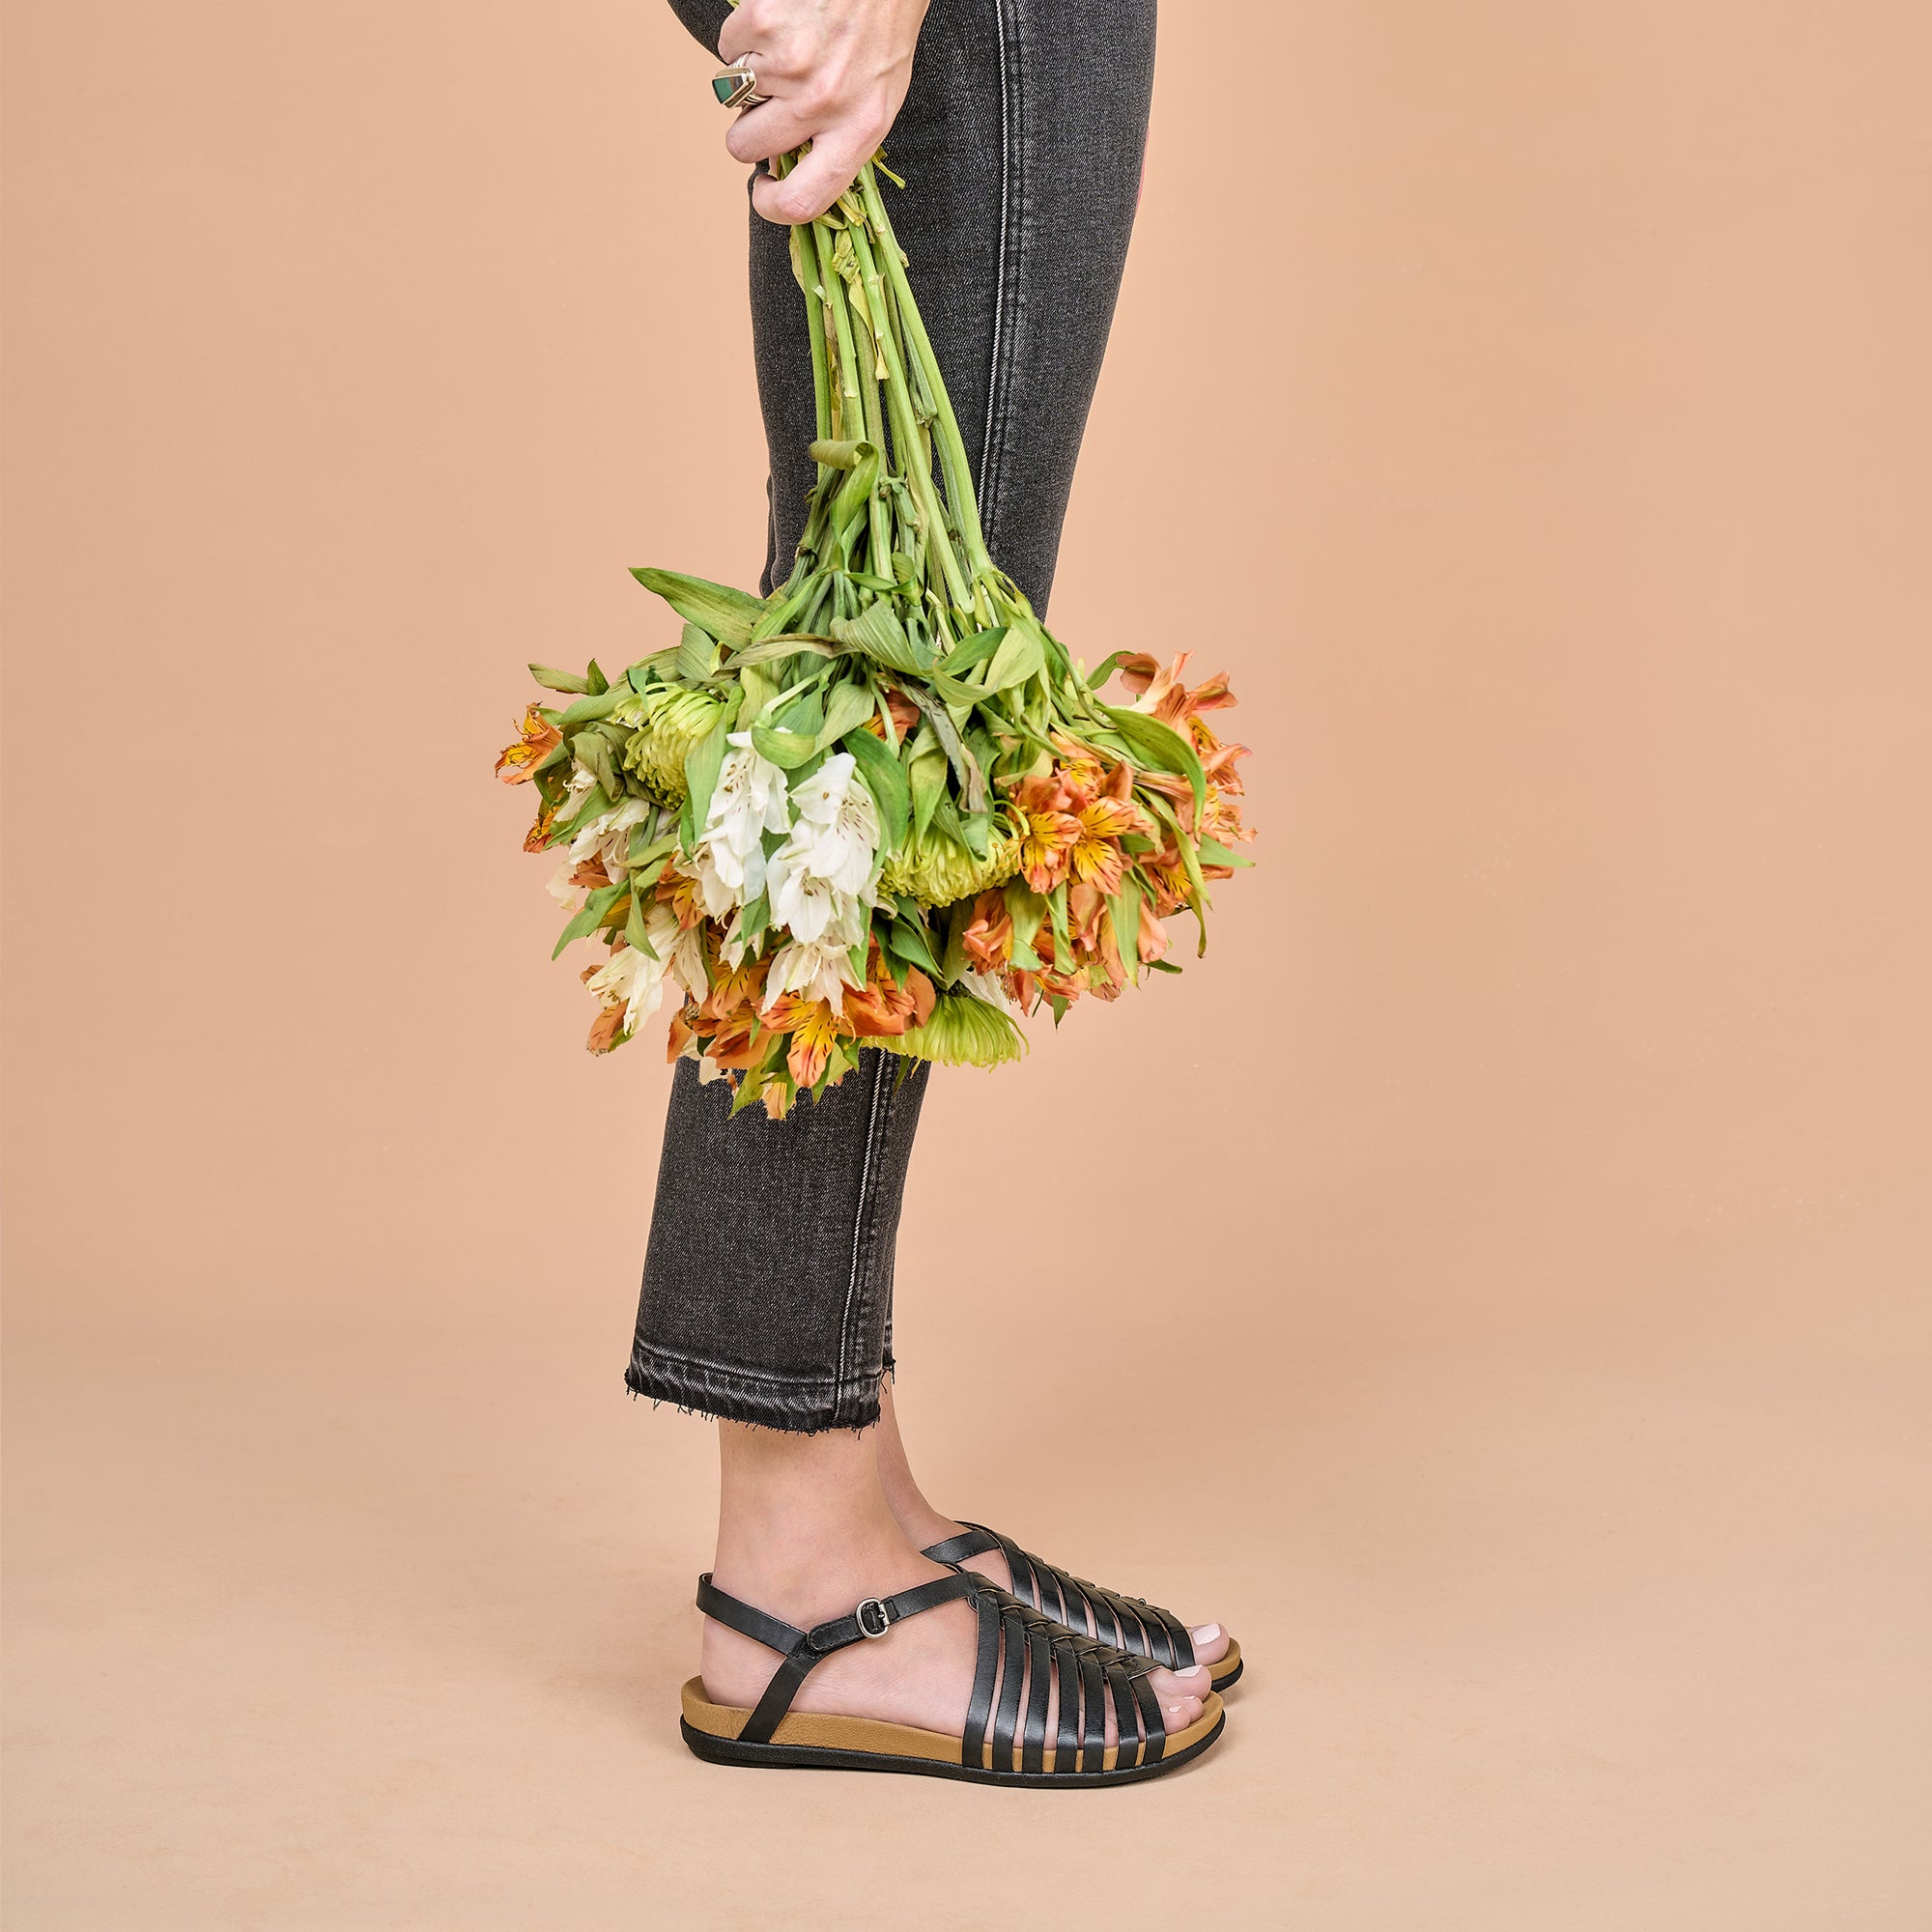 A woman holding flowers and wearing black fisherman sandals against a pale orange background.